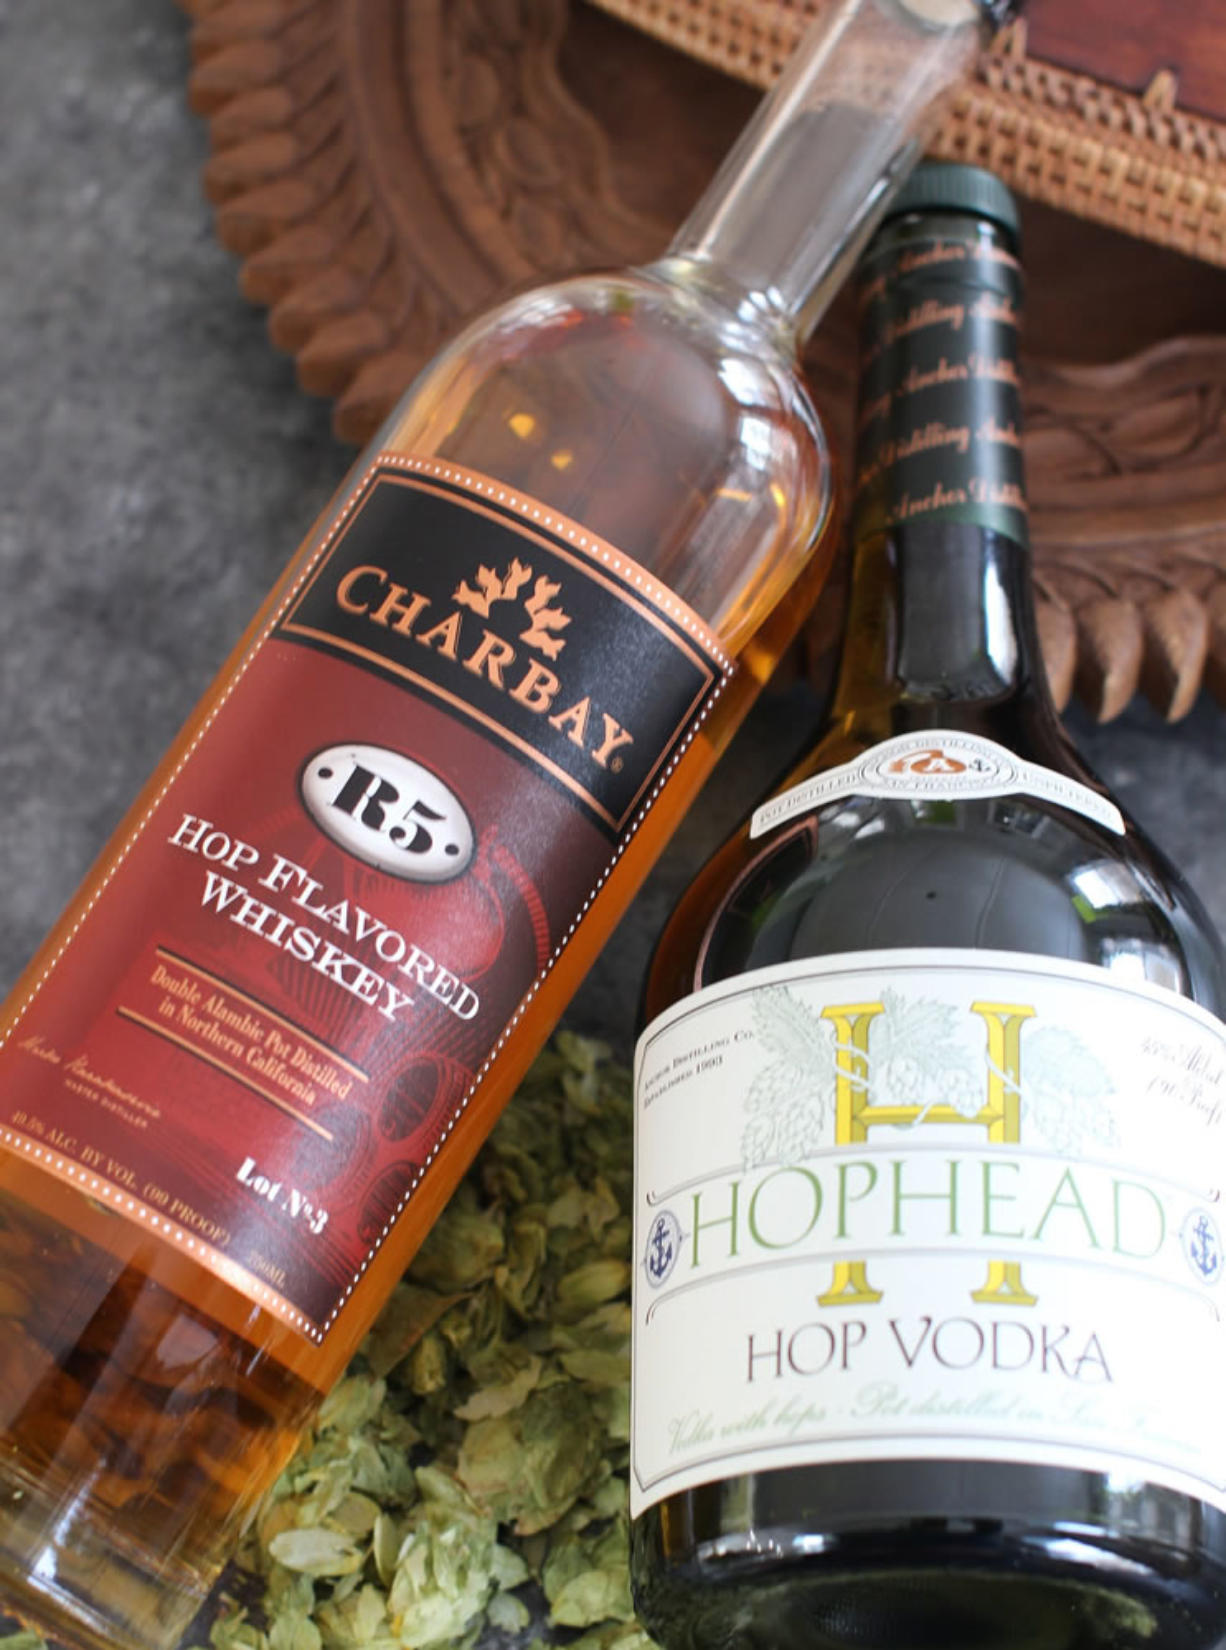 Craft liquor makers, including Charbay Hop Flavored Whiskey and Hophead Hop Vodka, are borrowing from the beer world and adding hops for an aromatic twist.